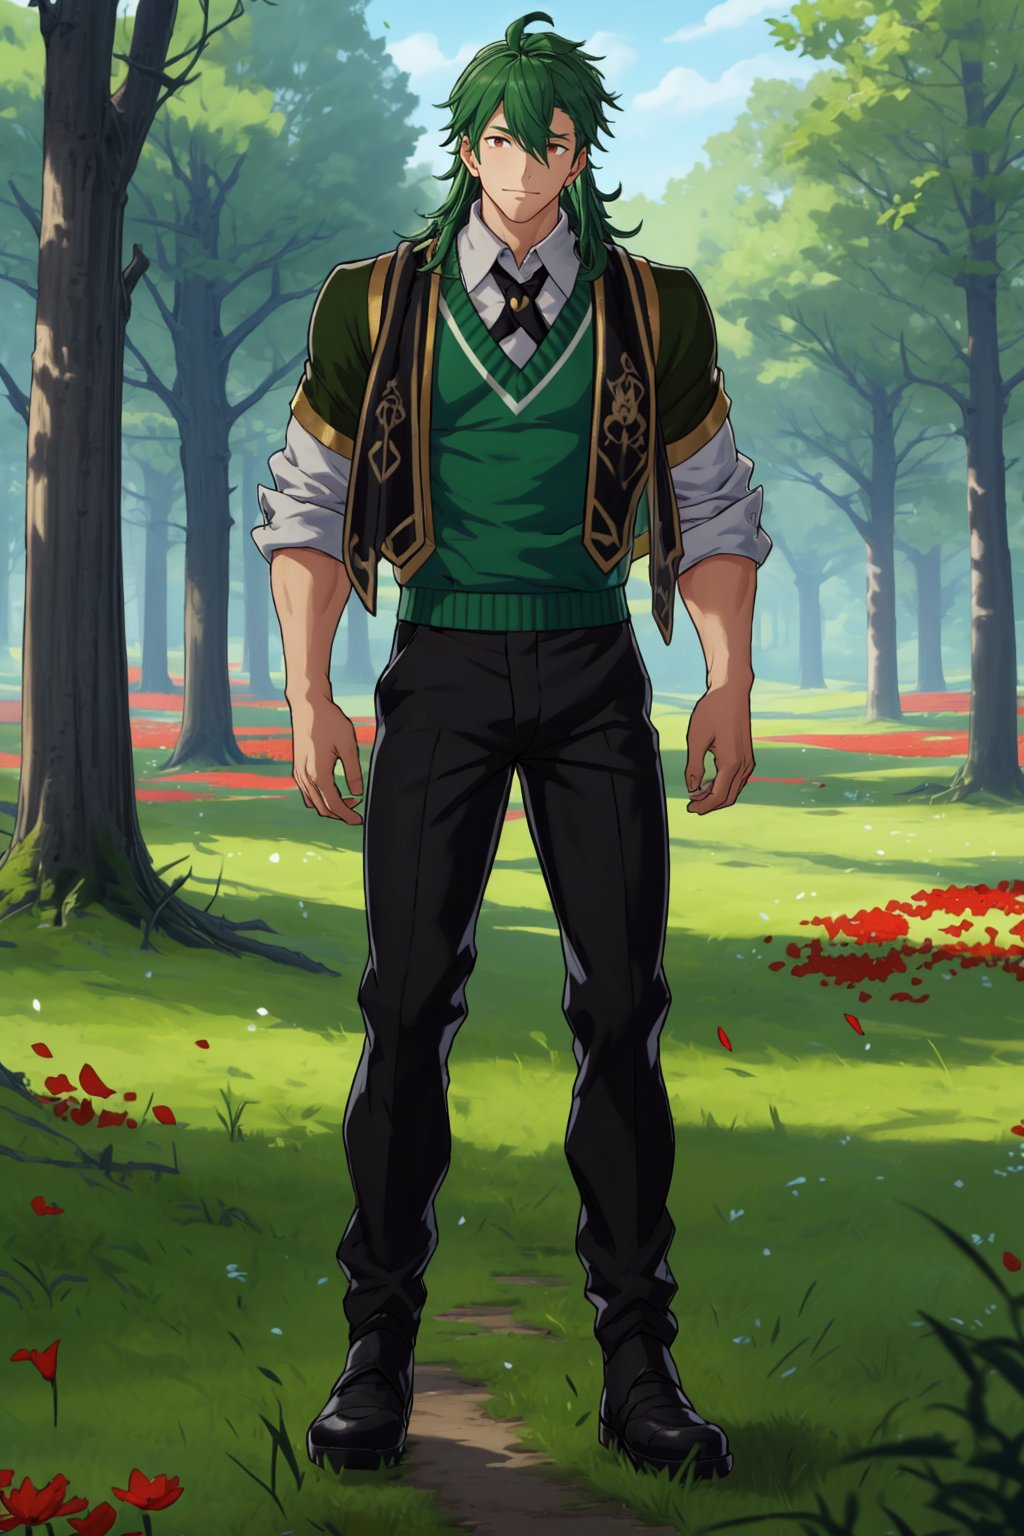 Gregory,  Man,  Masculine,  Masterpiece,  High Quality,  Confident,  Rugged,  Dark Green Long Hair,  White Collared Shirt,  Green Vest,  Scarf,  Black Necktie,  Black Pants,  Boots,  Full Body,  Standing,  Dark Dirt Path,  Grassy Field,  Oak Trees,  Delicate Red Flowers Everywhere,  Tiny Red Petals Floating in the Wind,  Red Petals Falling Everywhere,  One Hand on Hip,  Very Broad Shoulders,  Large Pectorals,  Muscular,  Large Muscles,  Manly,  Handsome,<lora:EMS-254033-EMS:0.700000>,<lora:EMS-179-EMS:0.500000>